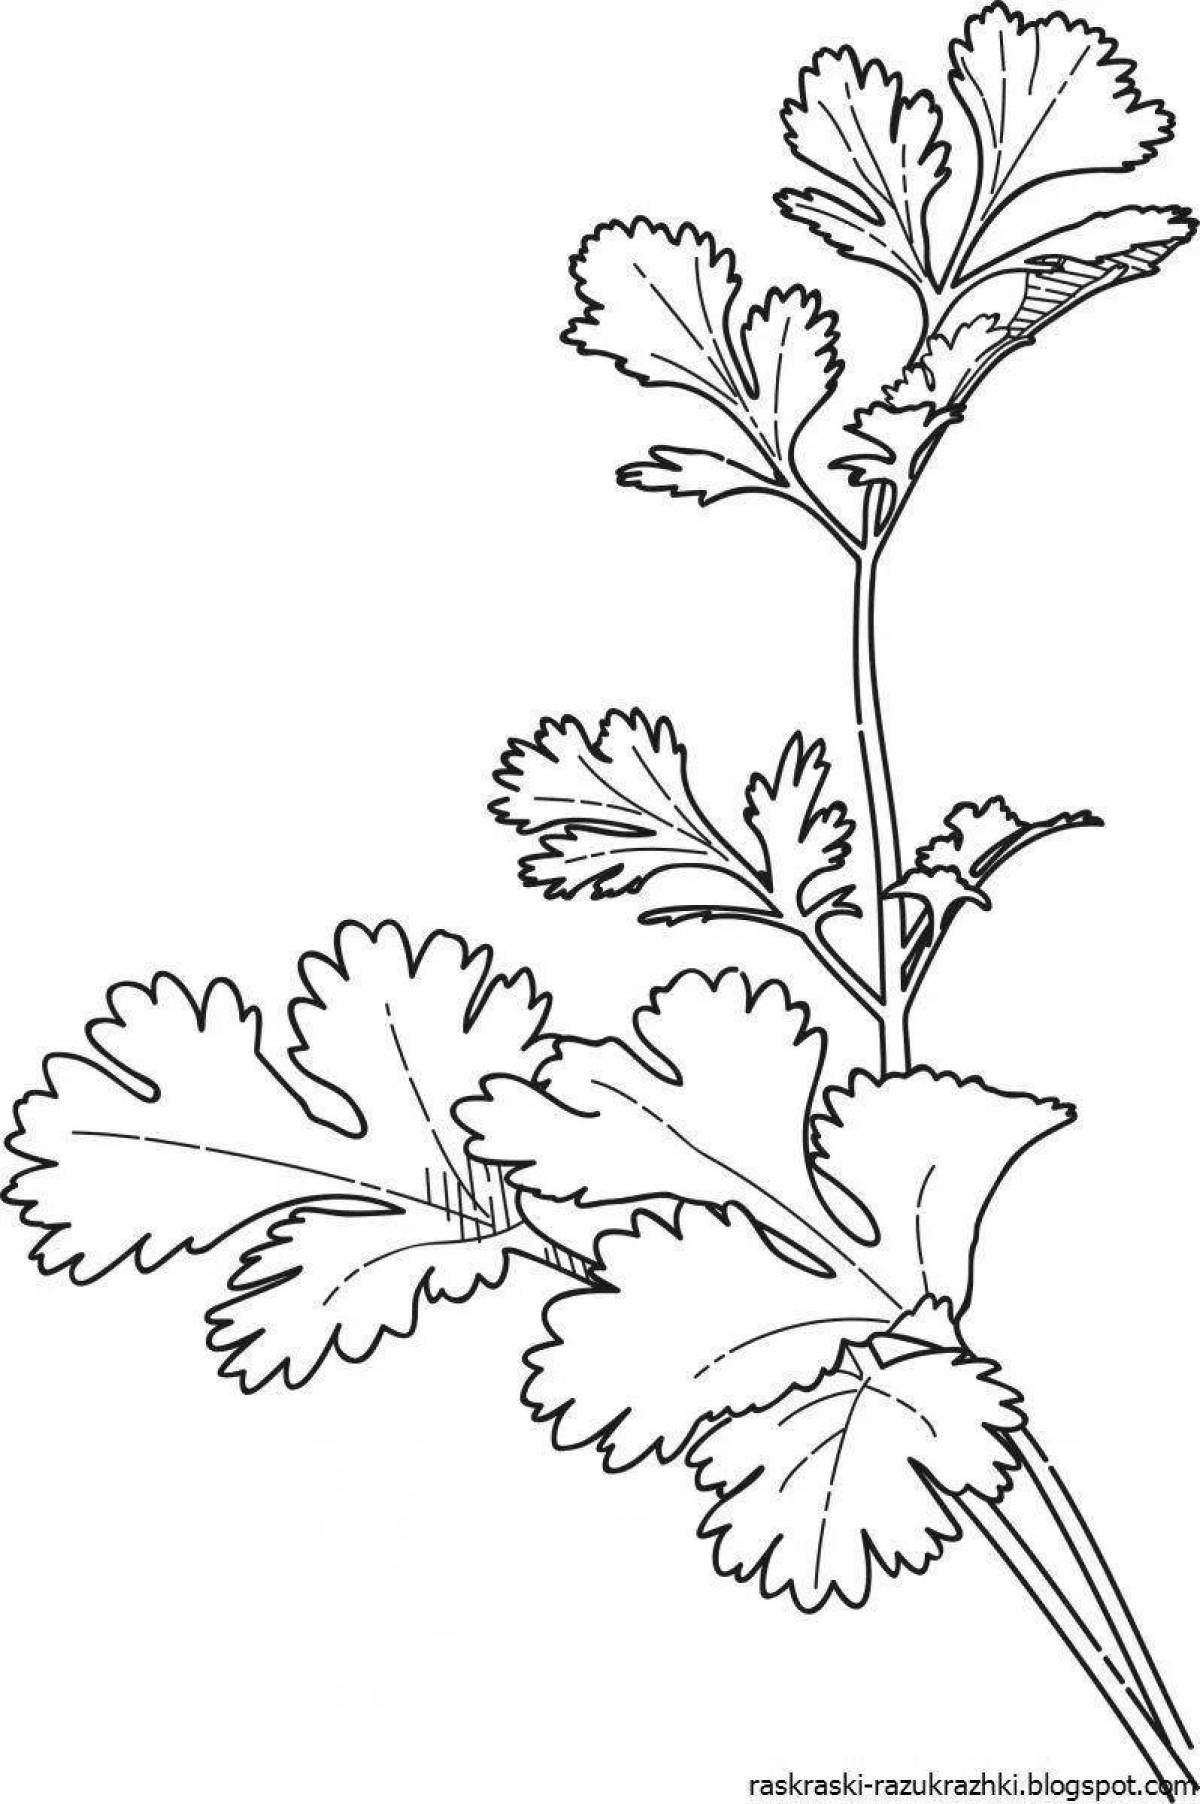 Delightful parsley coloring book for kids